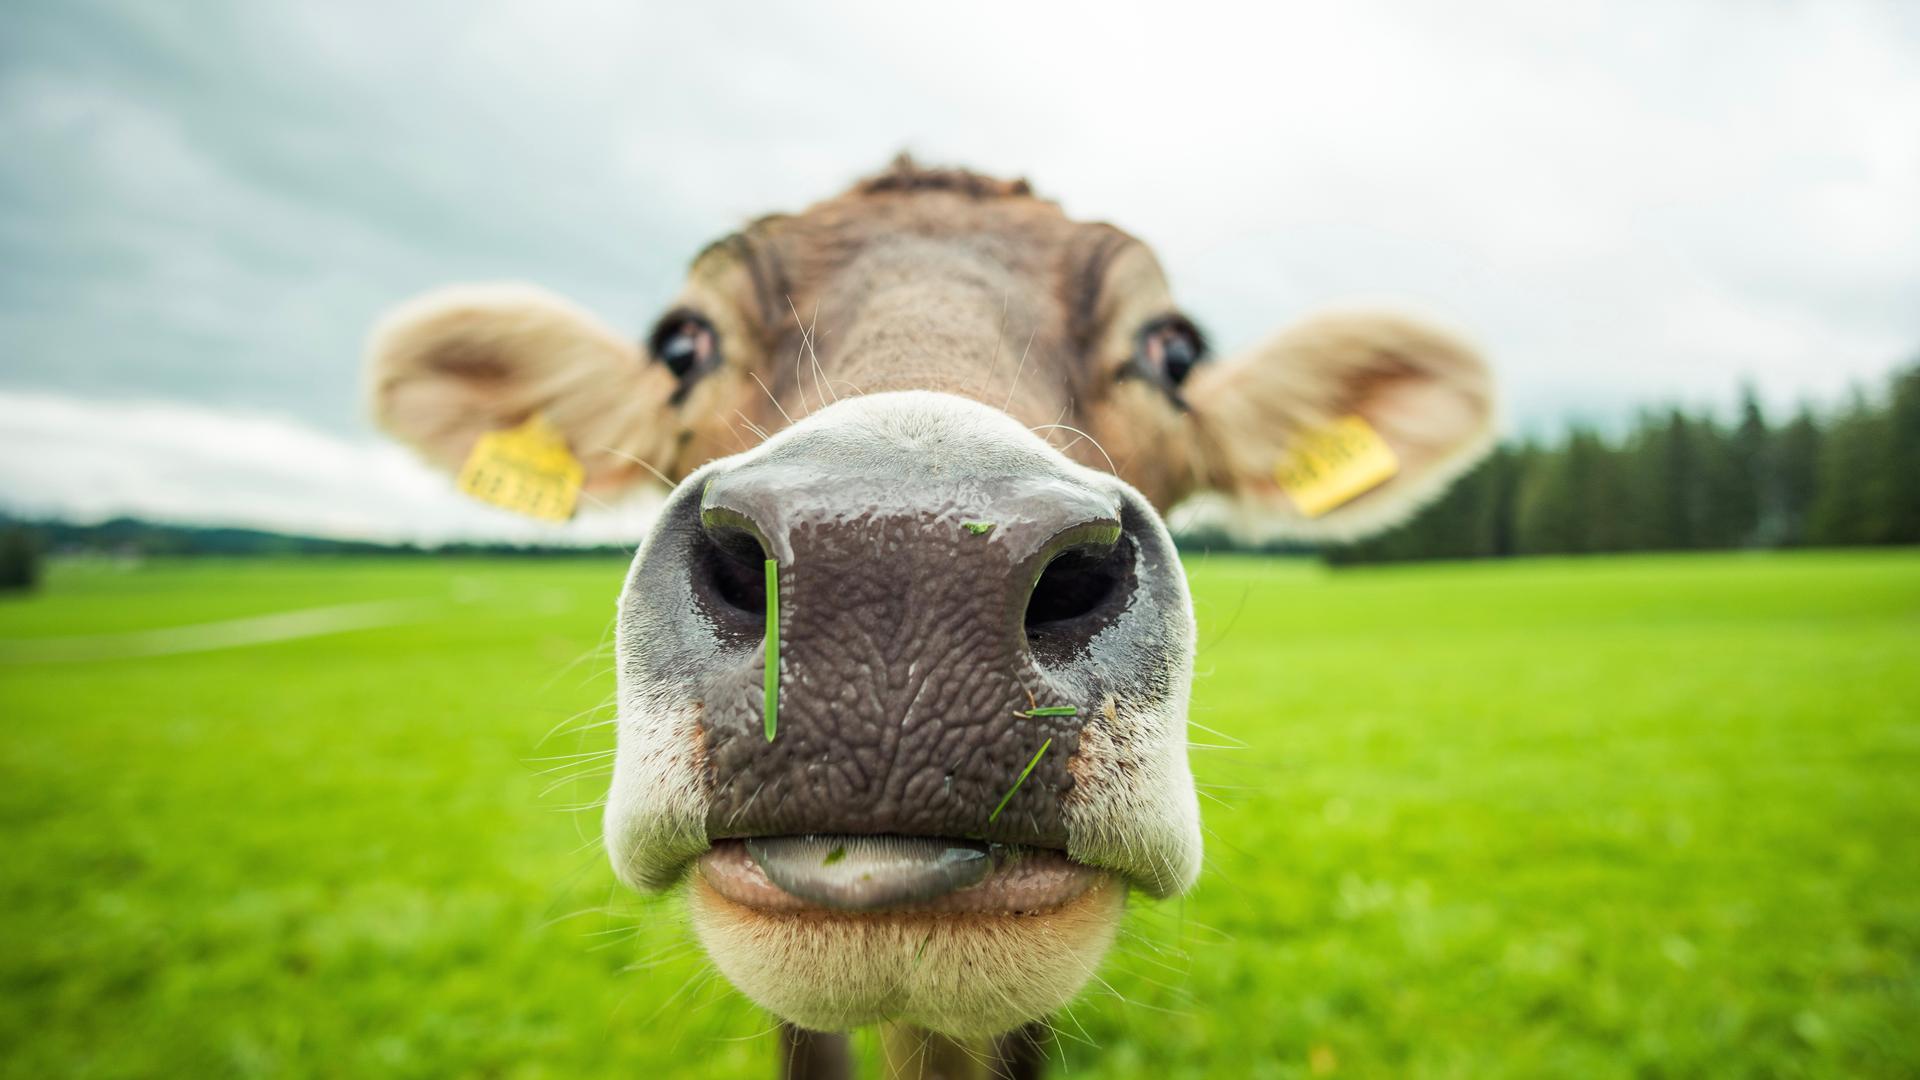 Research at The University of Sydney in Australia suggests cows have individual voices, and they talk to each other. 